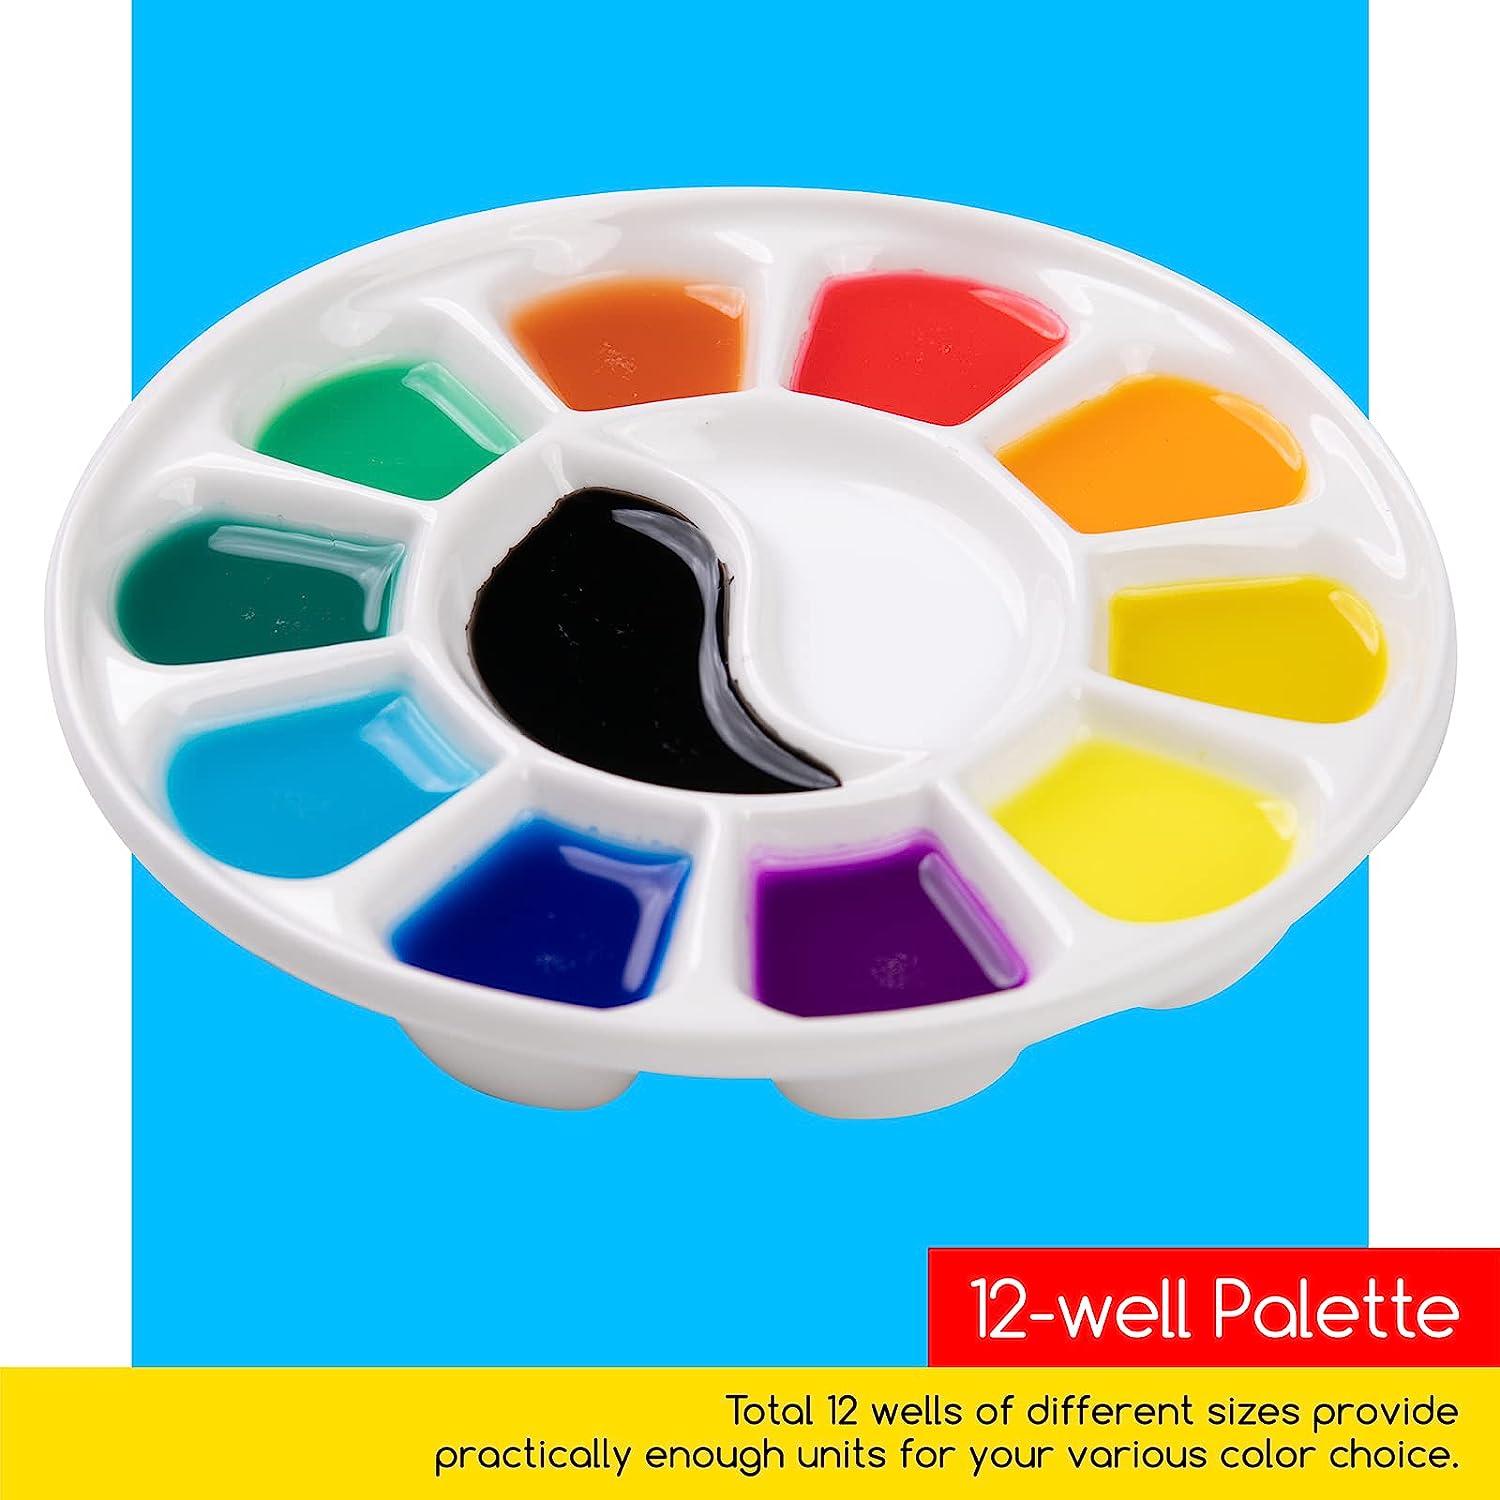  12 Wells Ceramic Palette with Covers Porcelain Paint Palette  Mixing Tray for Painting Watercolor Gouache Arts & Crafts Accessories  Organizer Mixing Colors : Arts, Crafts & Sewing